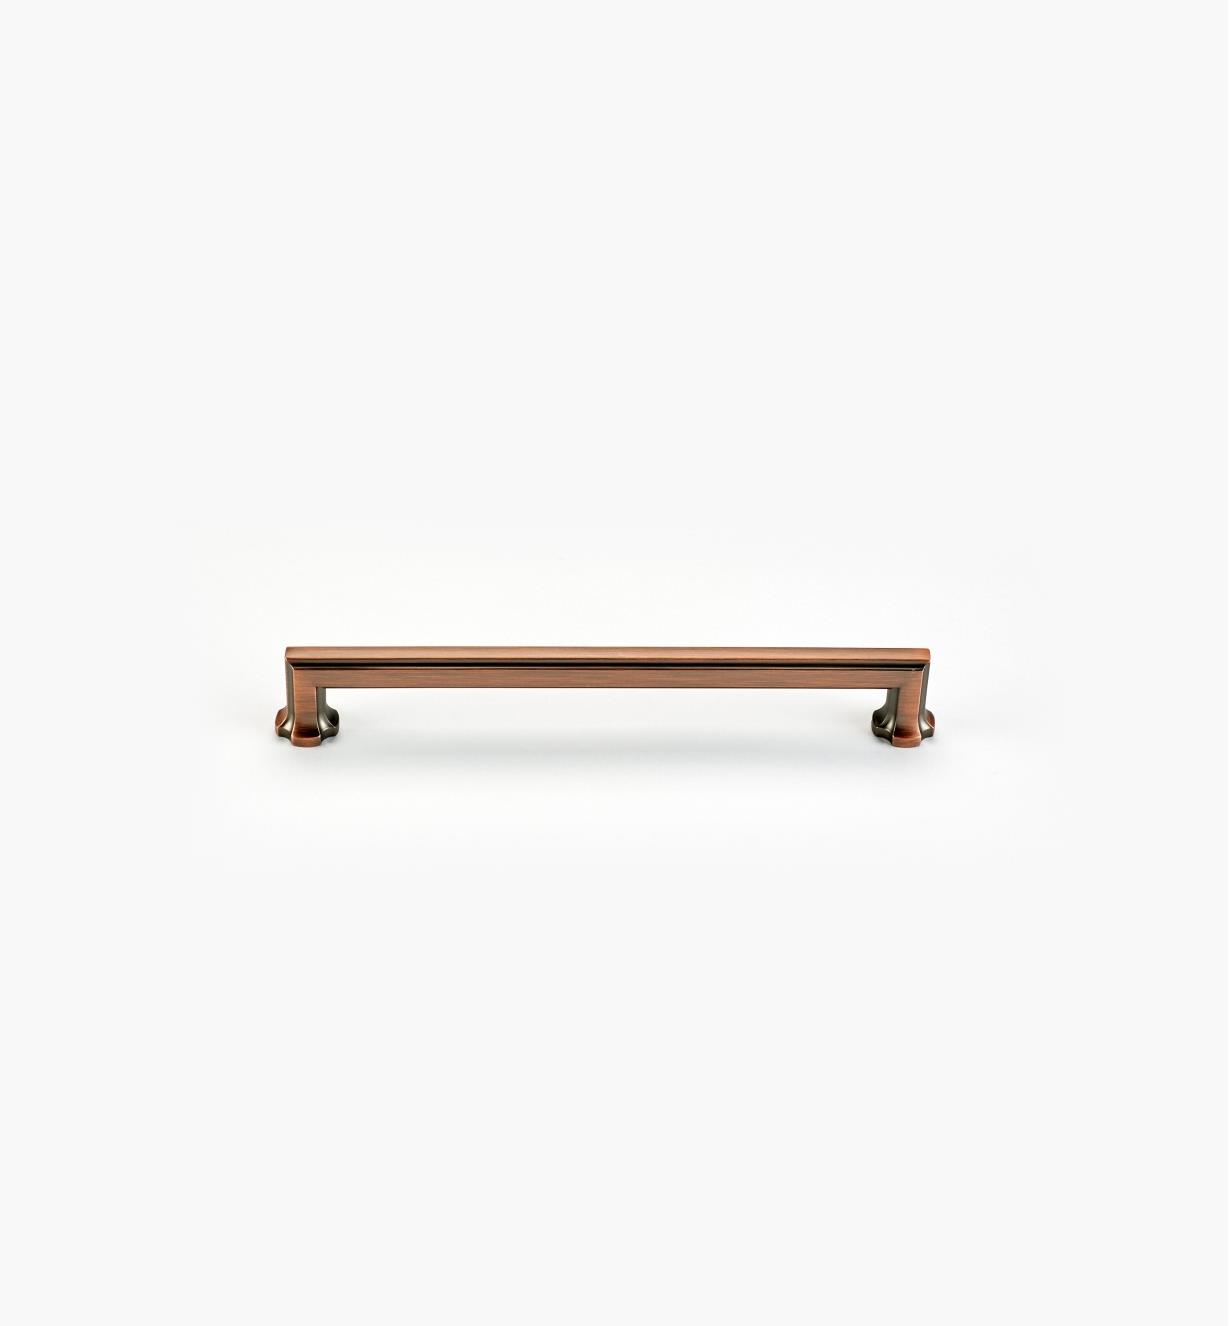 02A5104 - Empire Suite – 8" Brushed Bronze Handle (8 7/8")